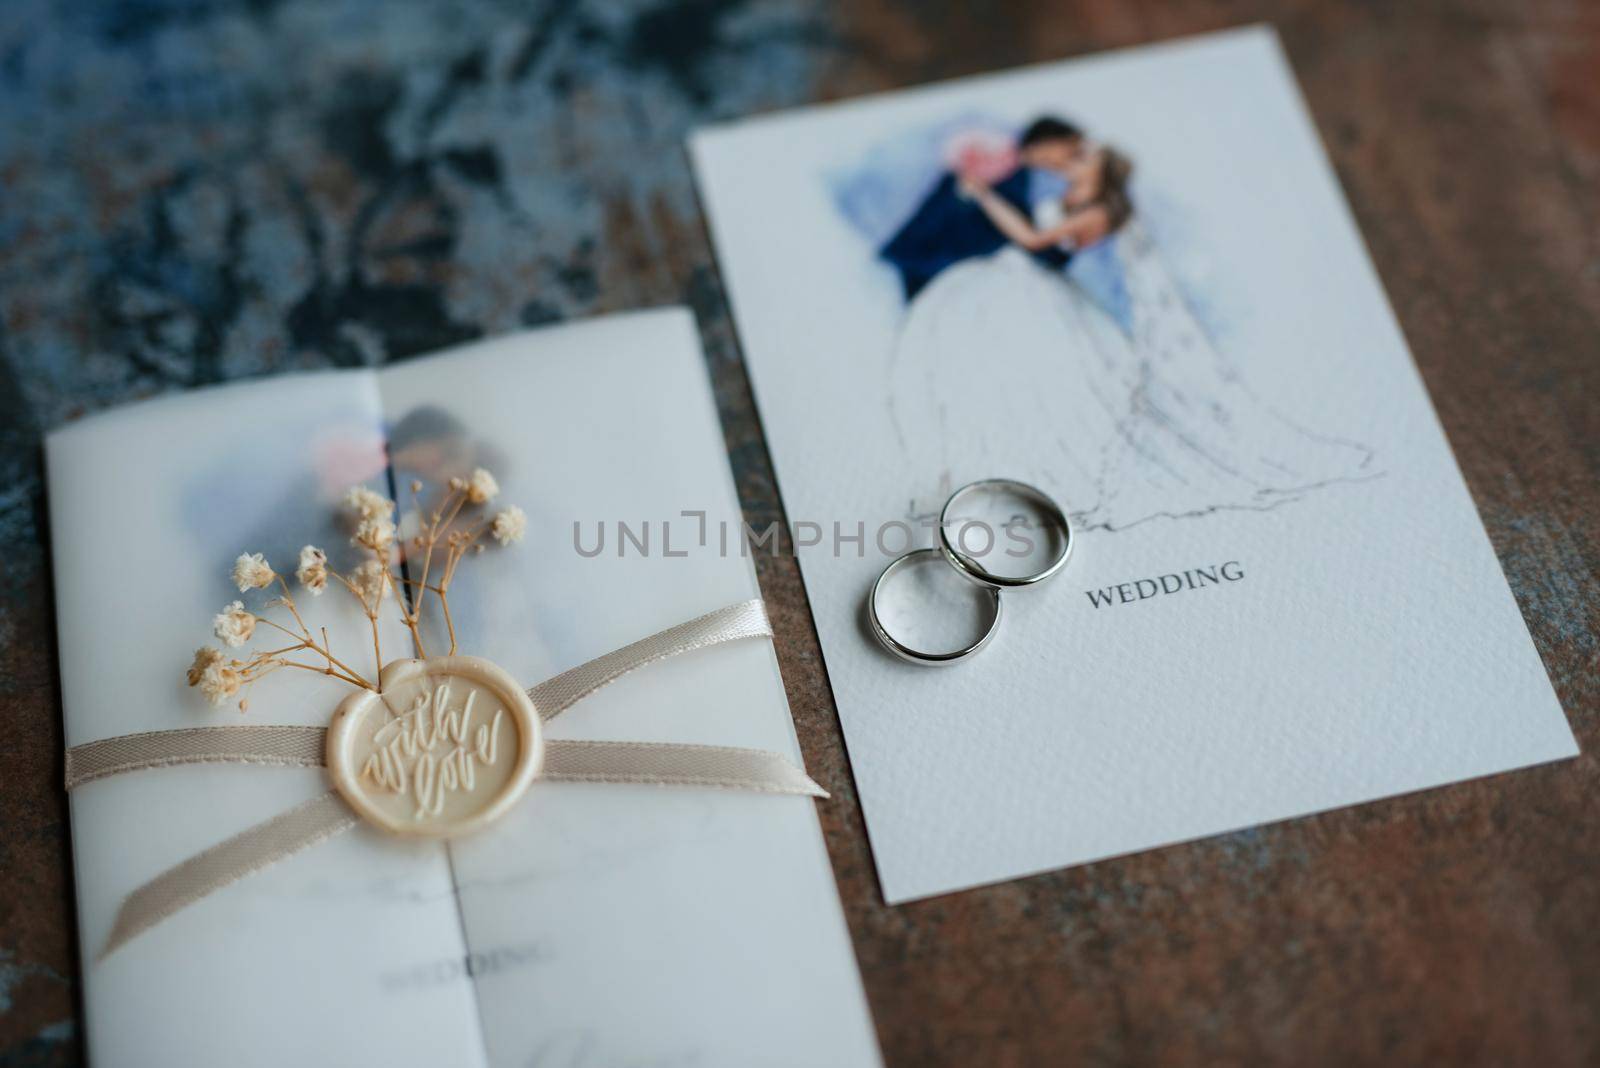 gold wedding rings with a invitation wedding by Andreua